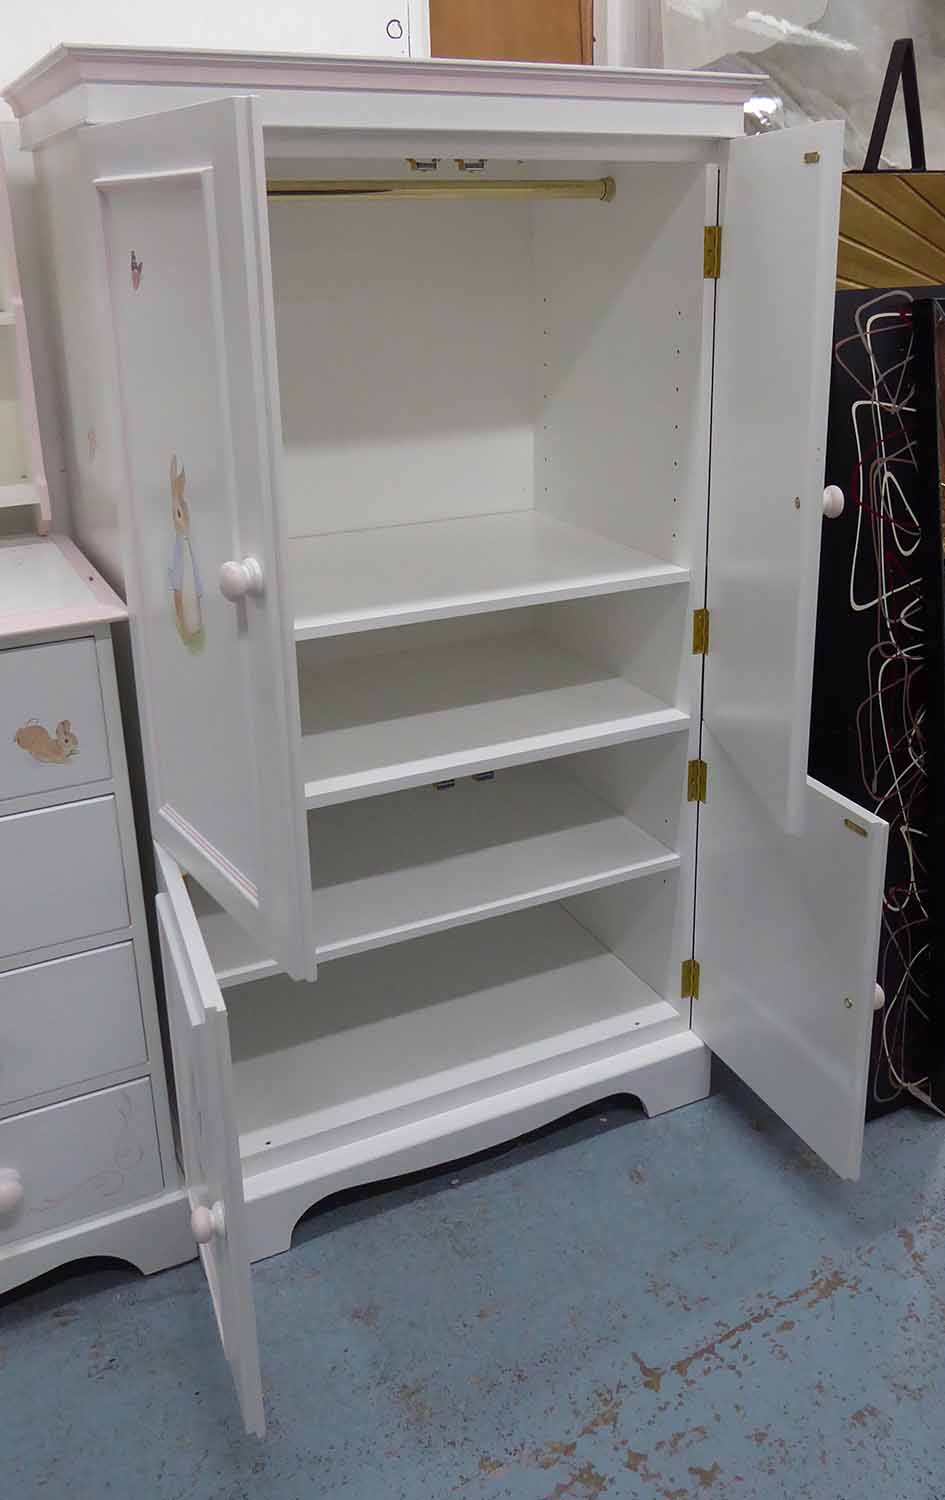 DRAGON'S OF WALTON ST. WARDROBE, with four doors and interior shelves, 82cm x 53cm x 146cm H. - Image 2 of 2